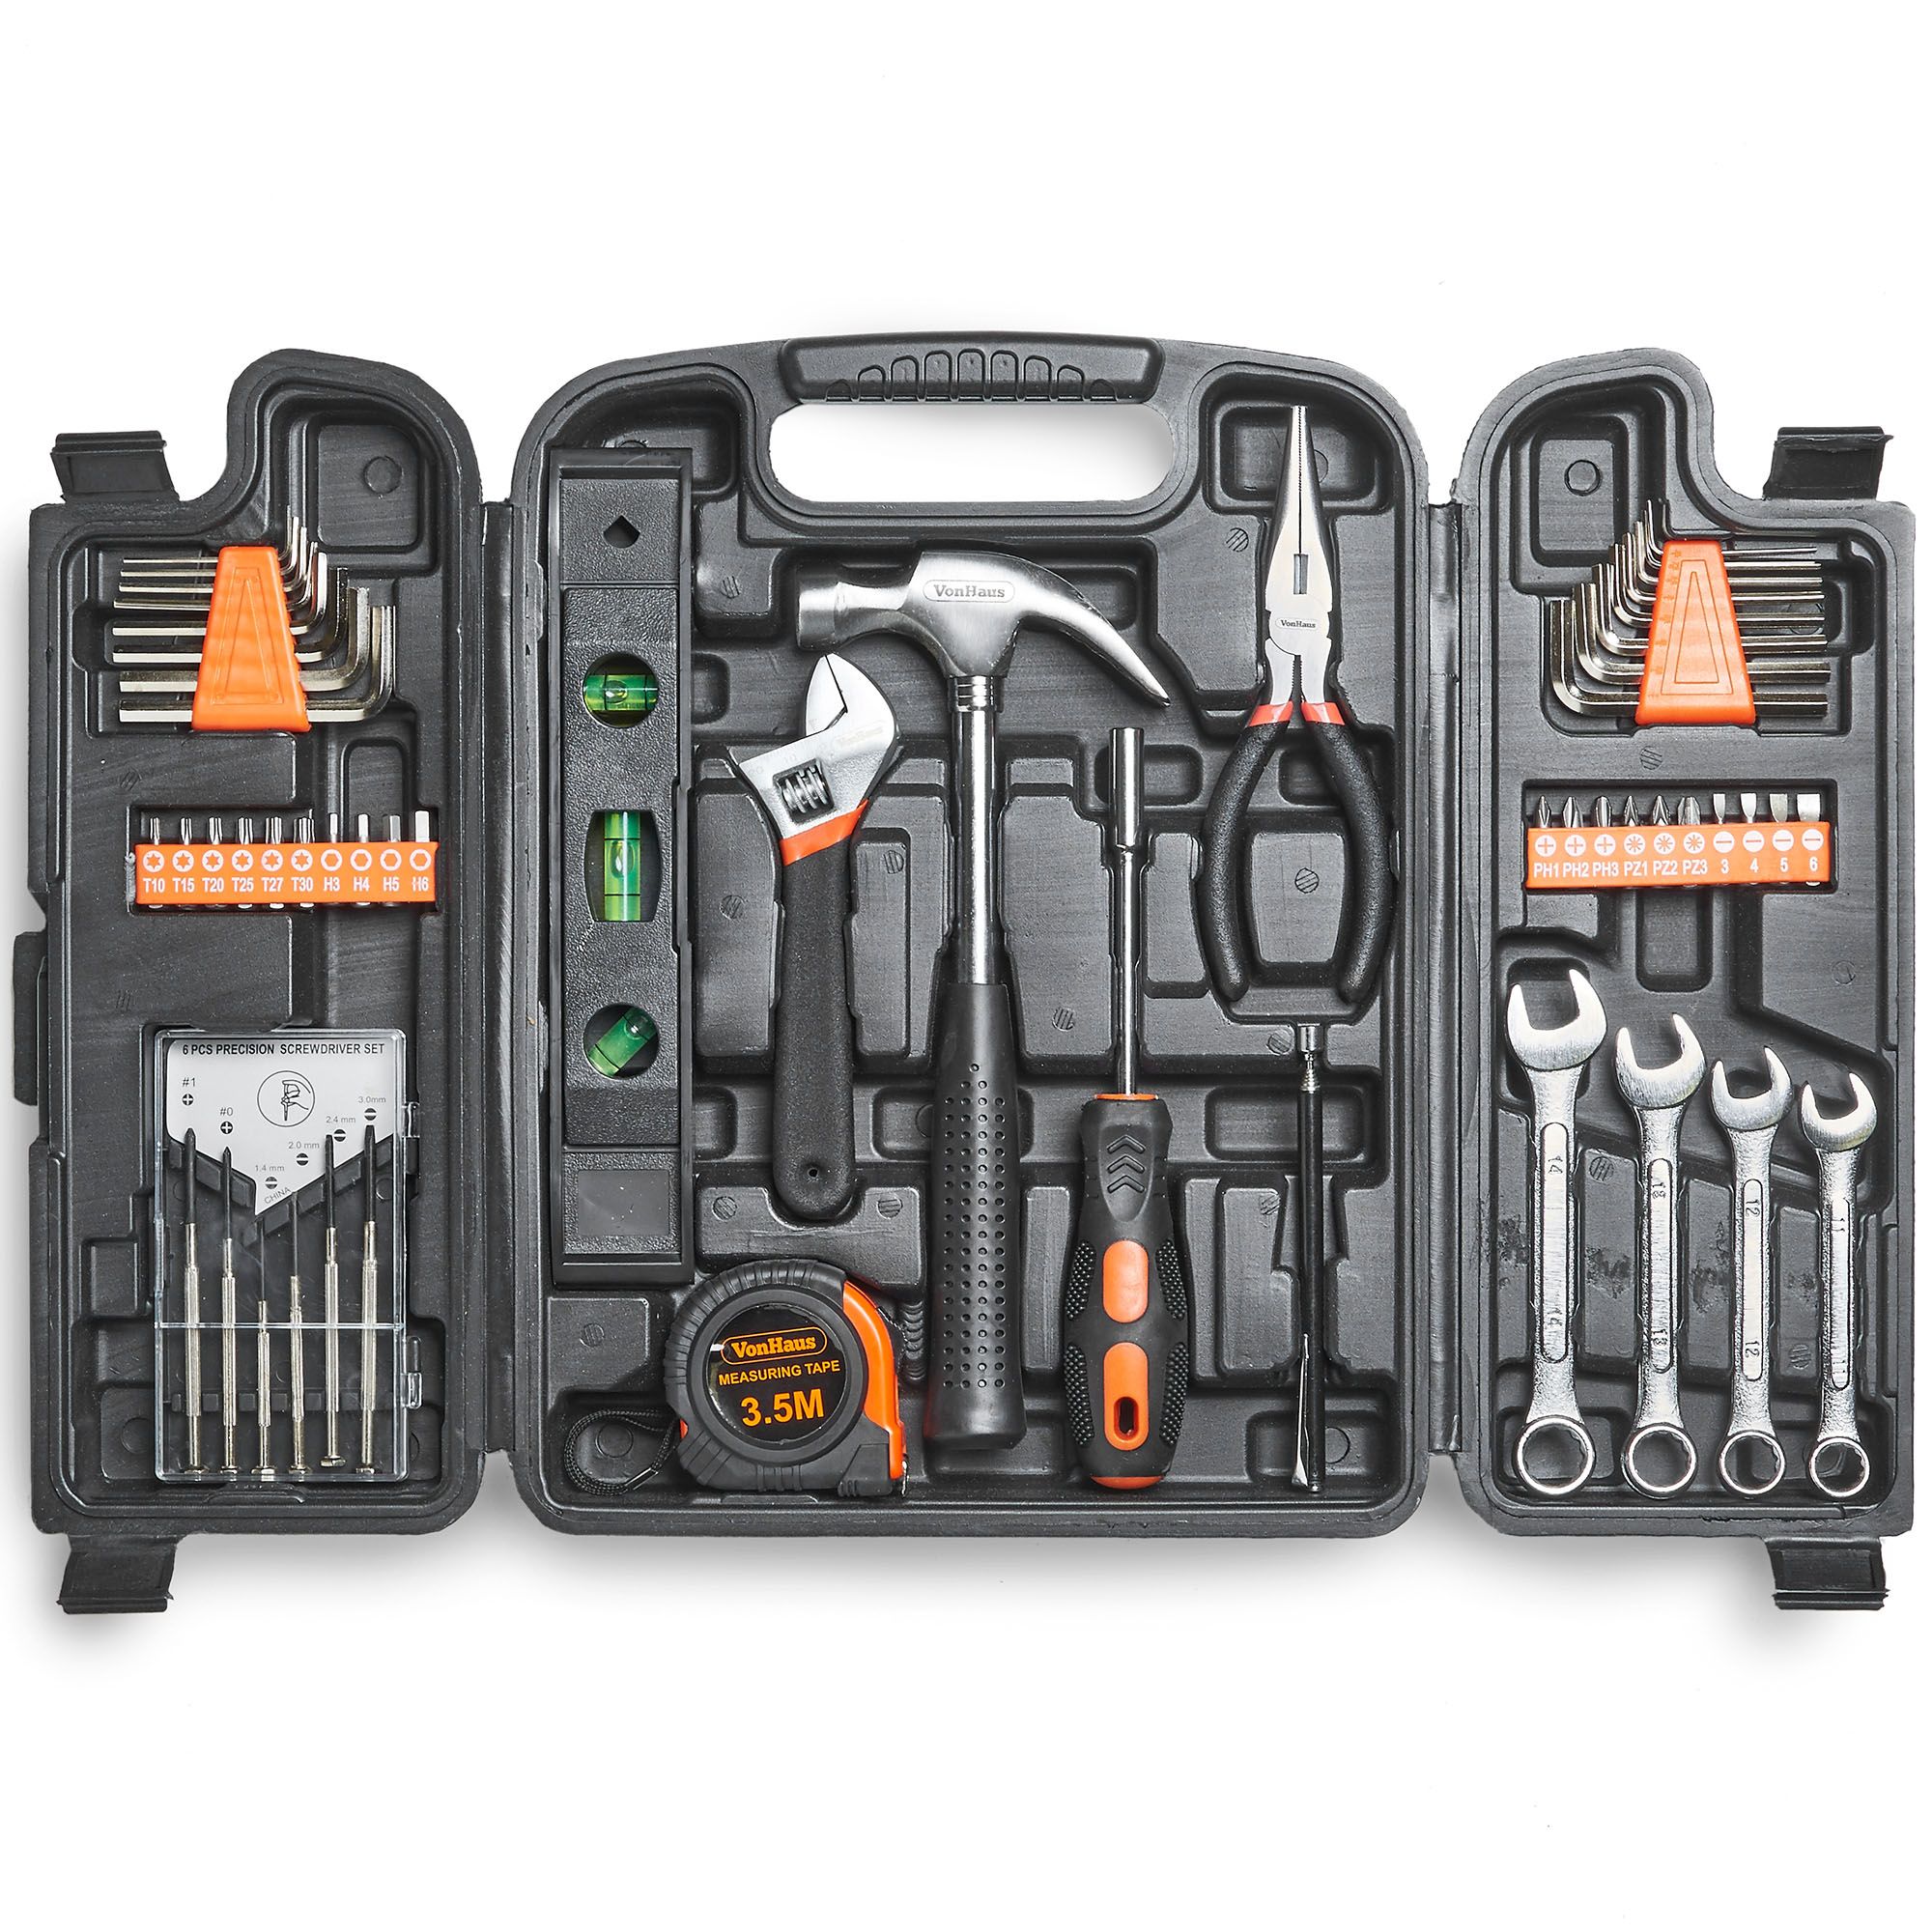 VonHaus-53pc-Household-Tools-Set-Tools-Kit-Hardwearing-Steel-Feature-Soft-grip-Moulded-Handles-Tools-1761809